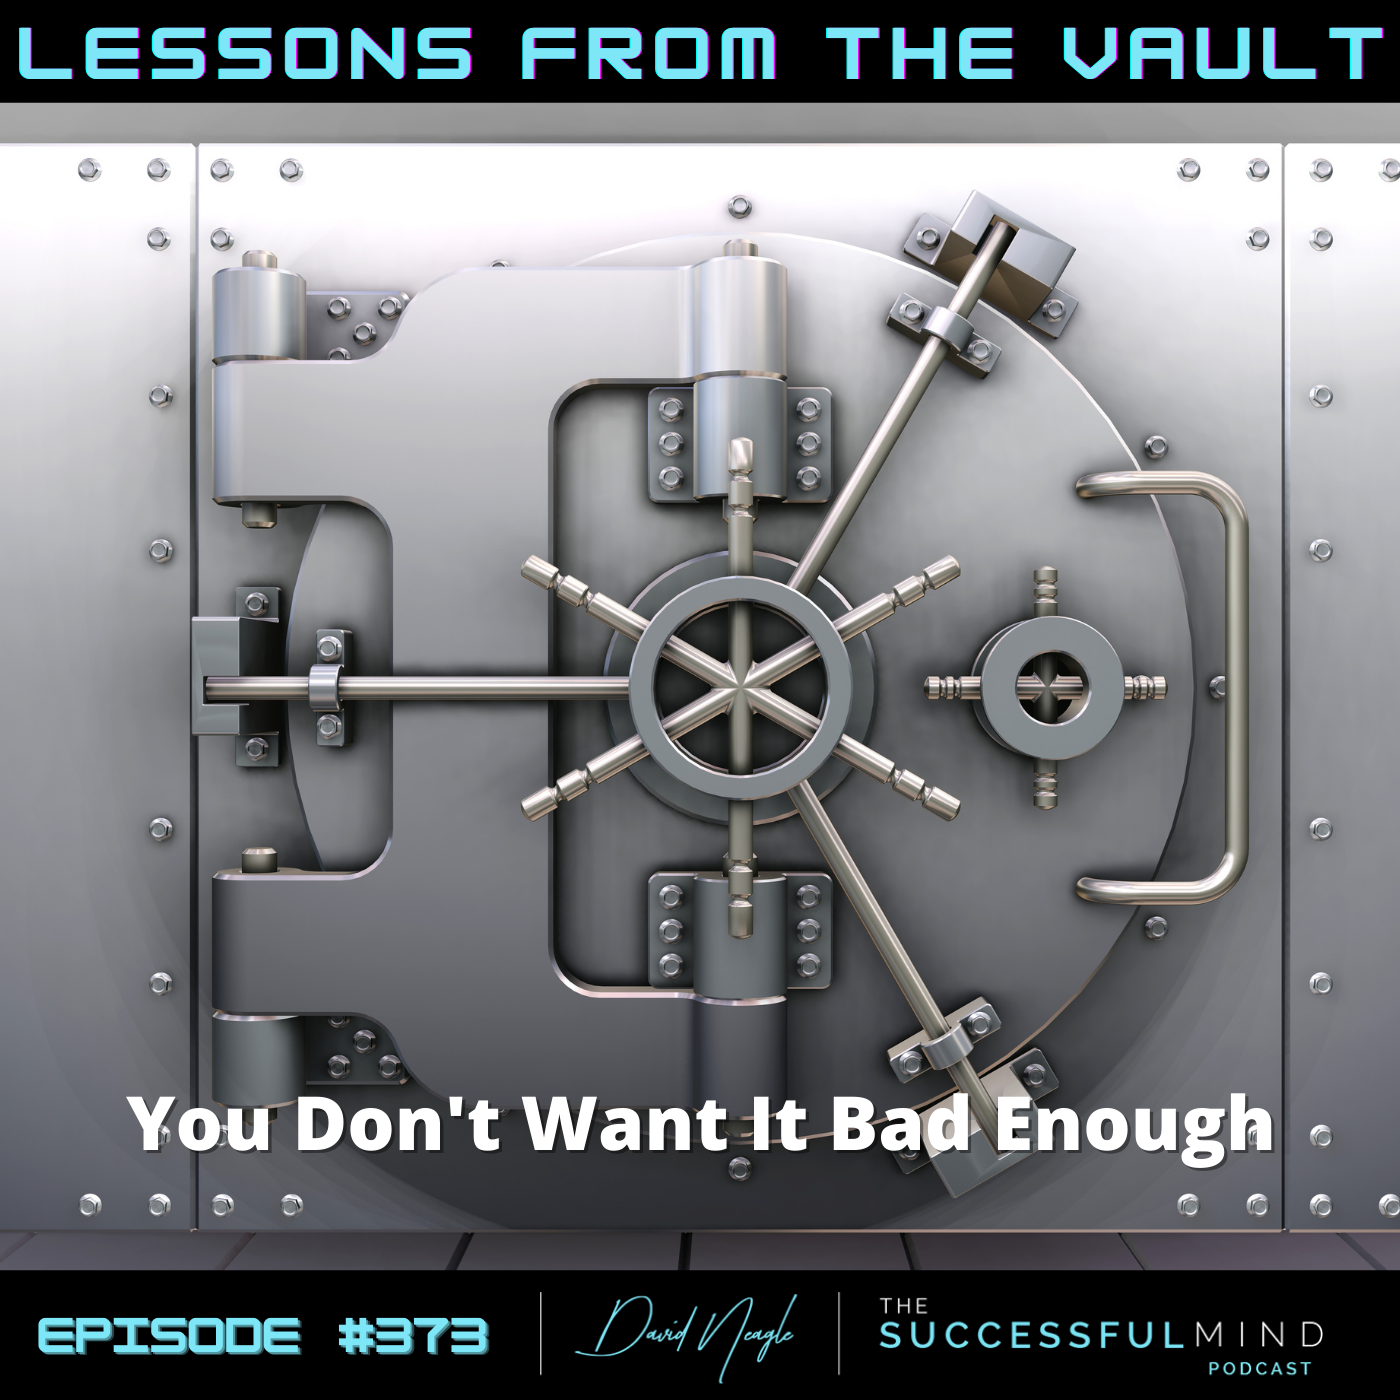 The Successful Mind Podcast- Lessons From The Vault - You Don't Want It Bad Enough